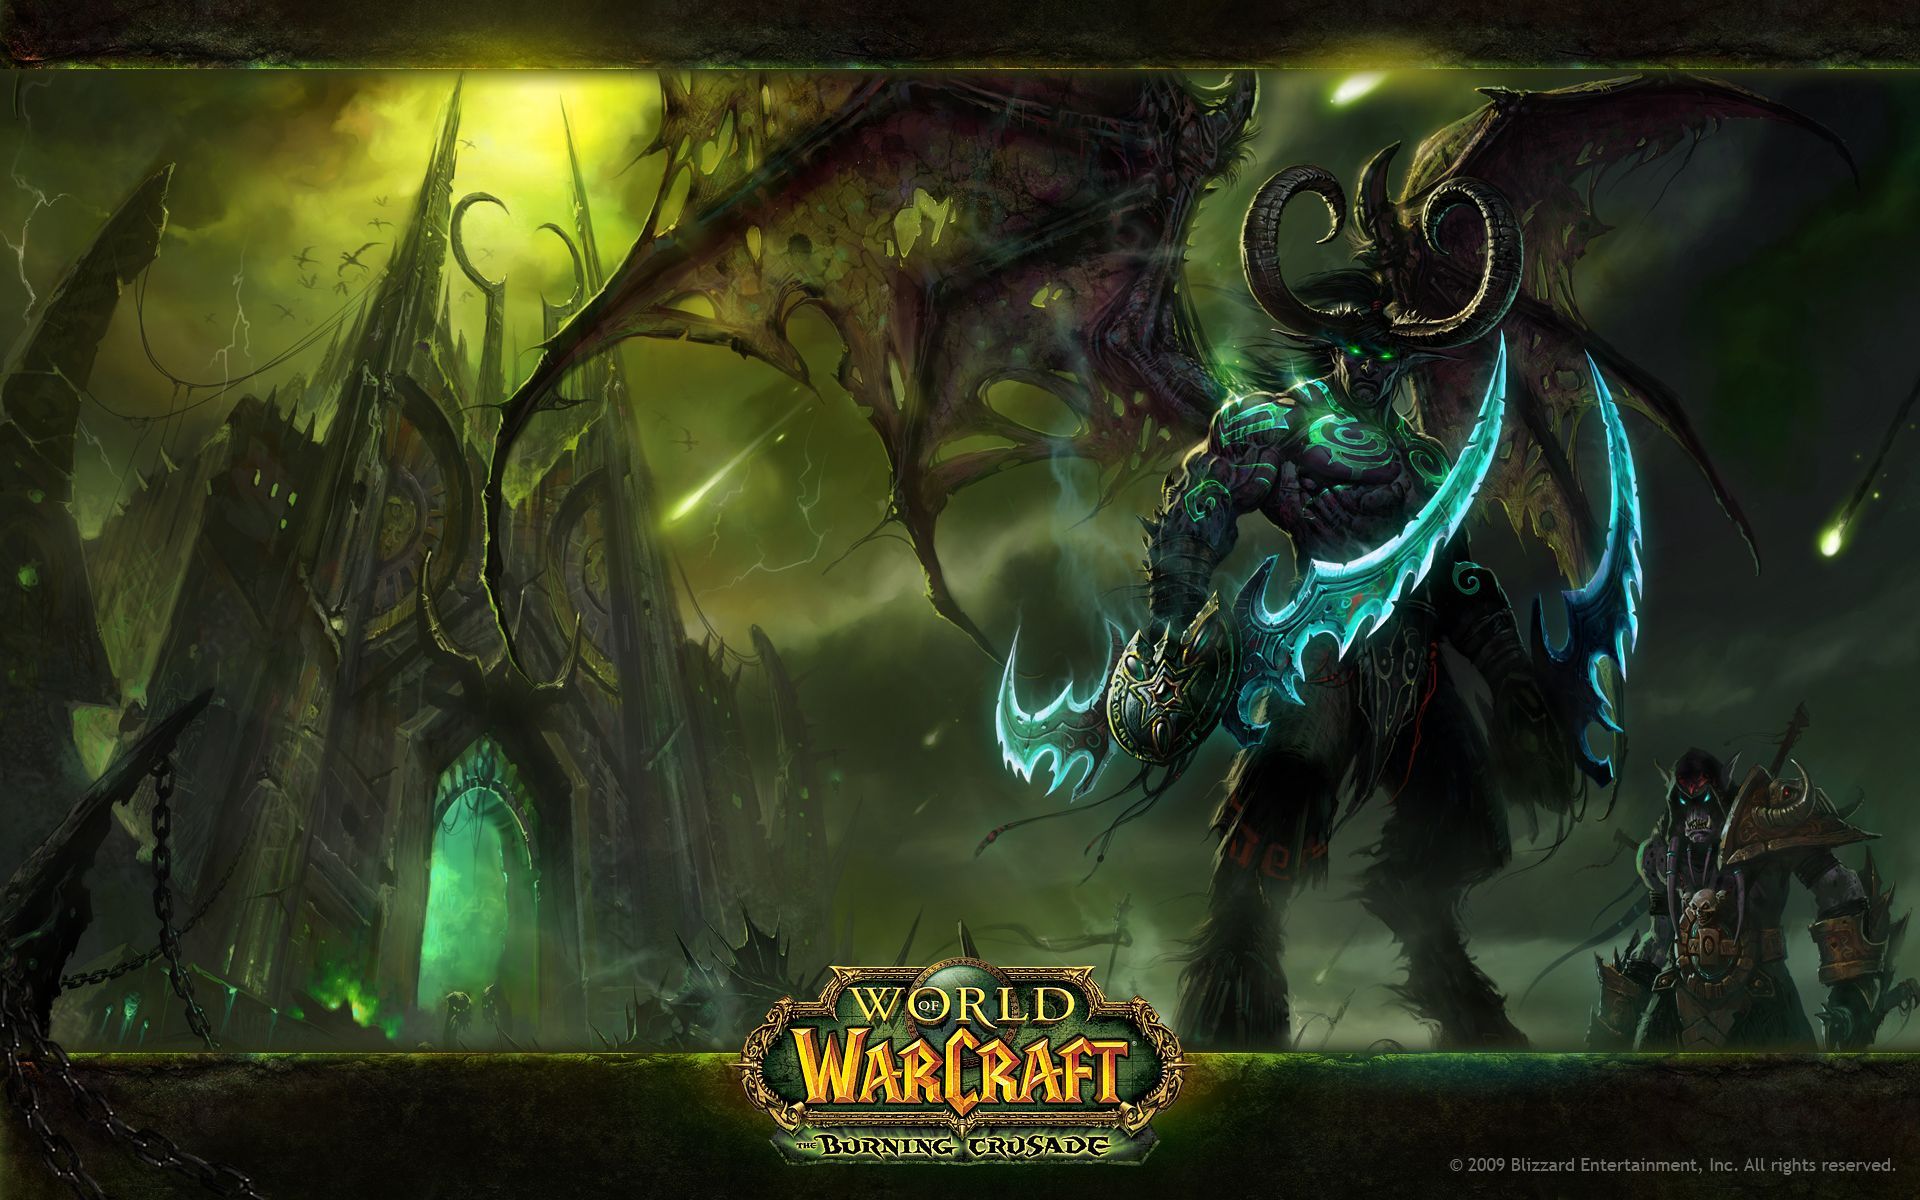 Most Beautiful World of Warcraft Wallpaper Full HD Pictures